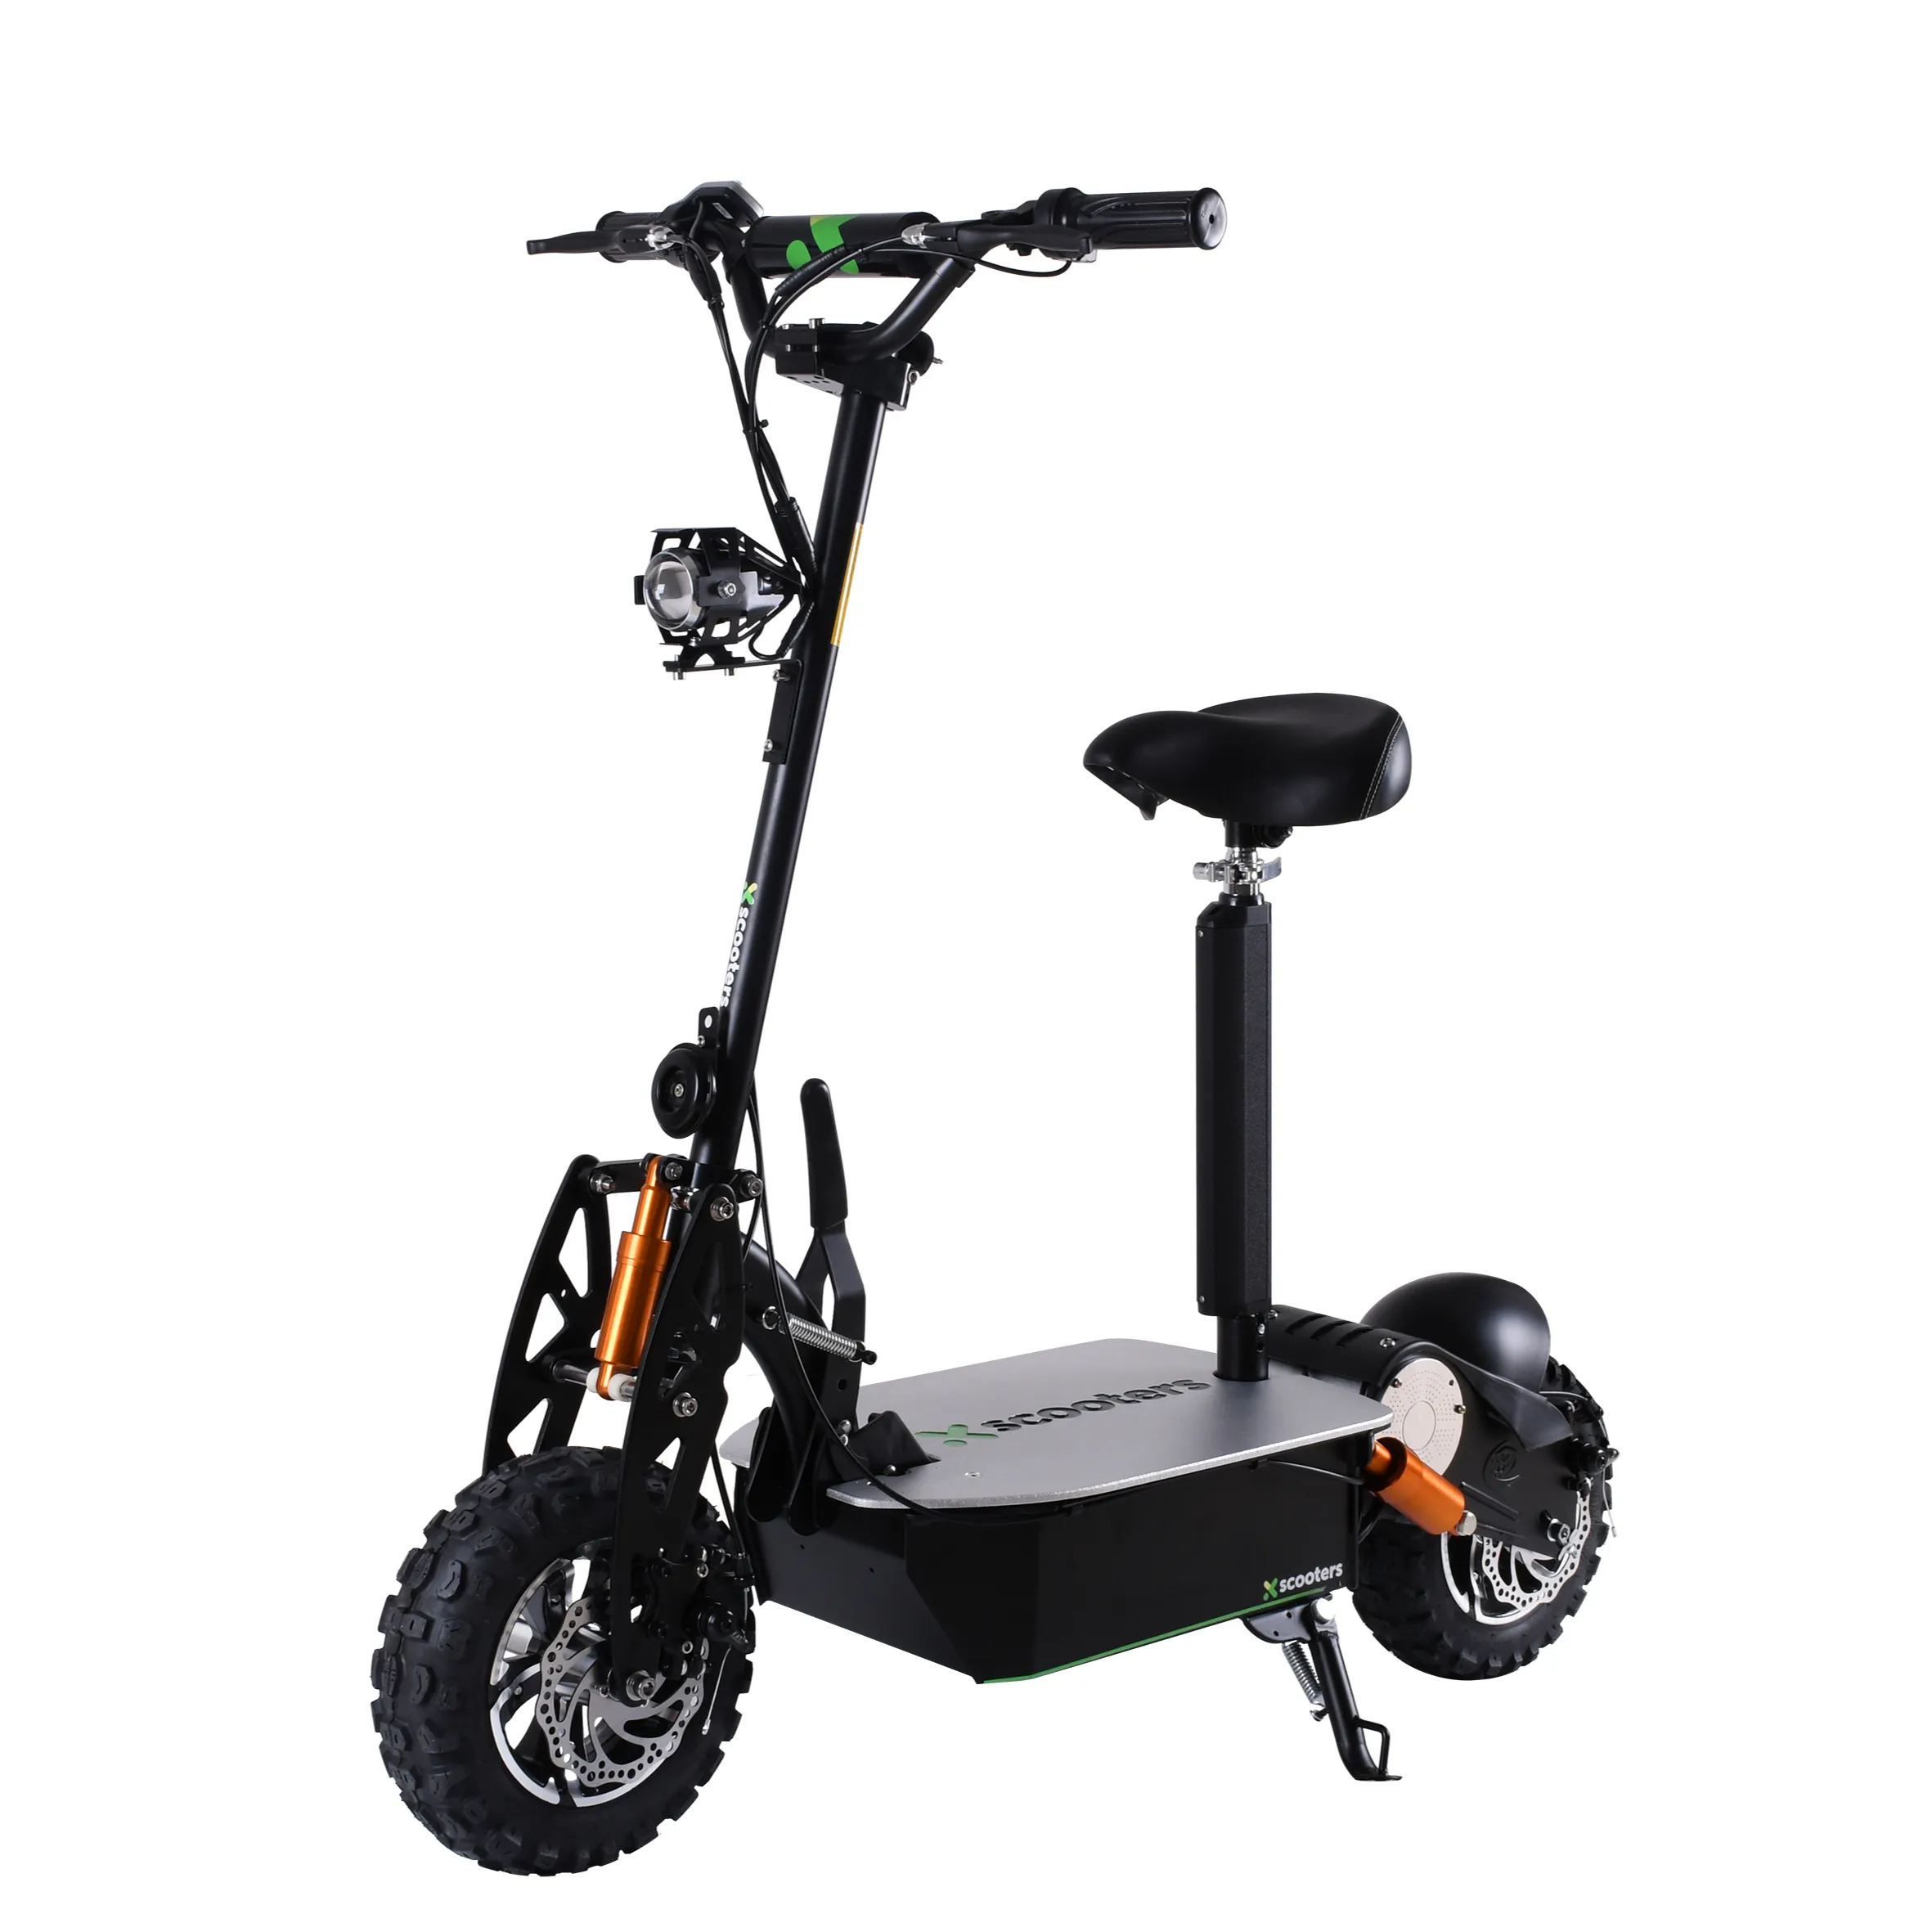 Home of the Worlds Fastest and Most Powerful 2000 watt 48v Lithium Electric Scooter and we have the lowest price guarantee or we